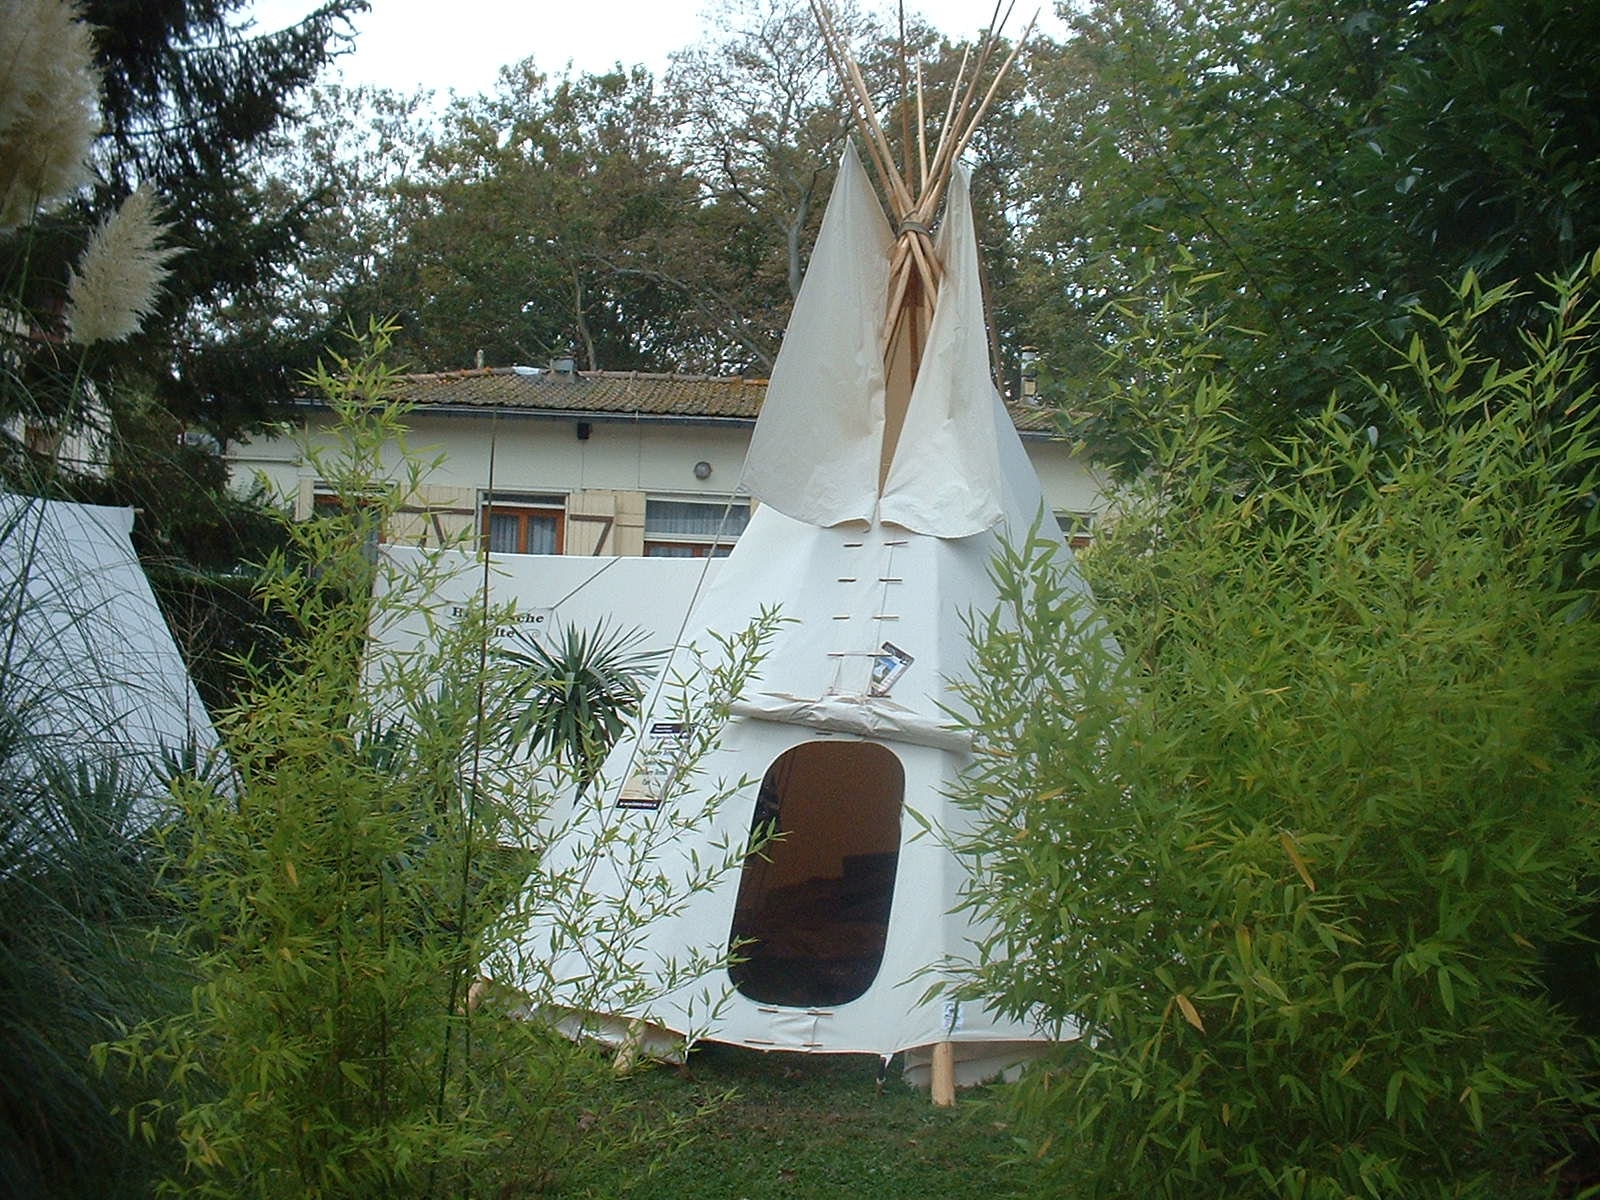 Tipi Teepee Full Size 4m Diameter Native American Tent for - Etsy